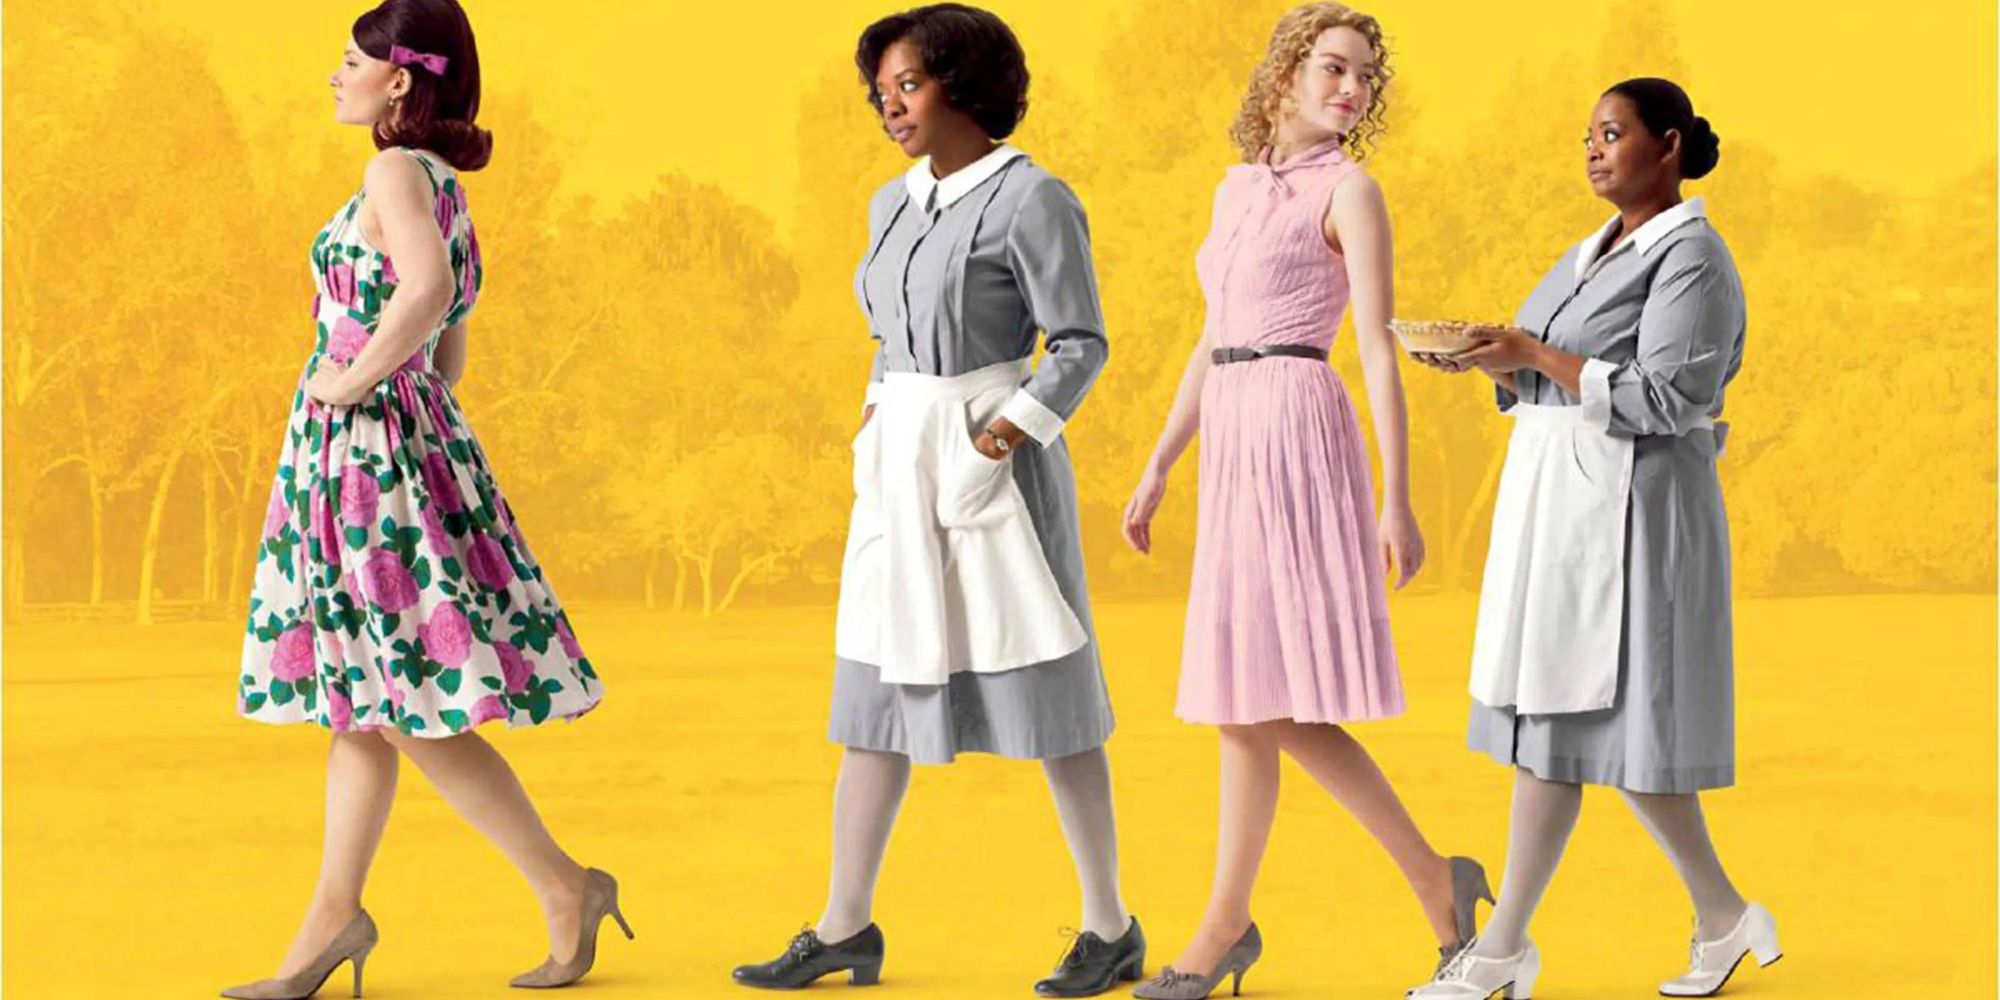 The main cast of The Help in a promotional poster for The Help.